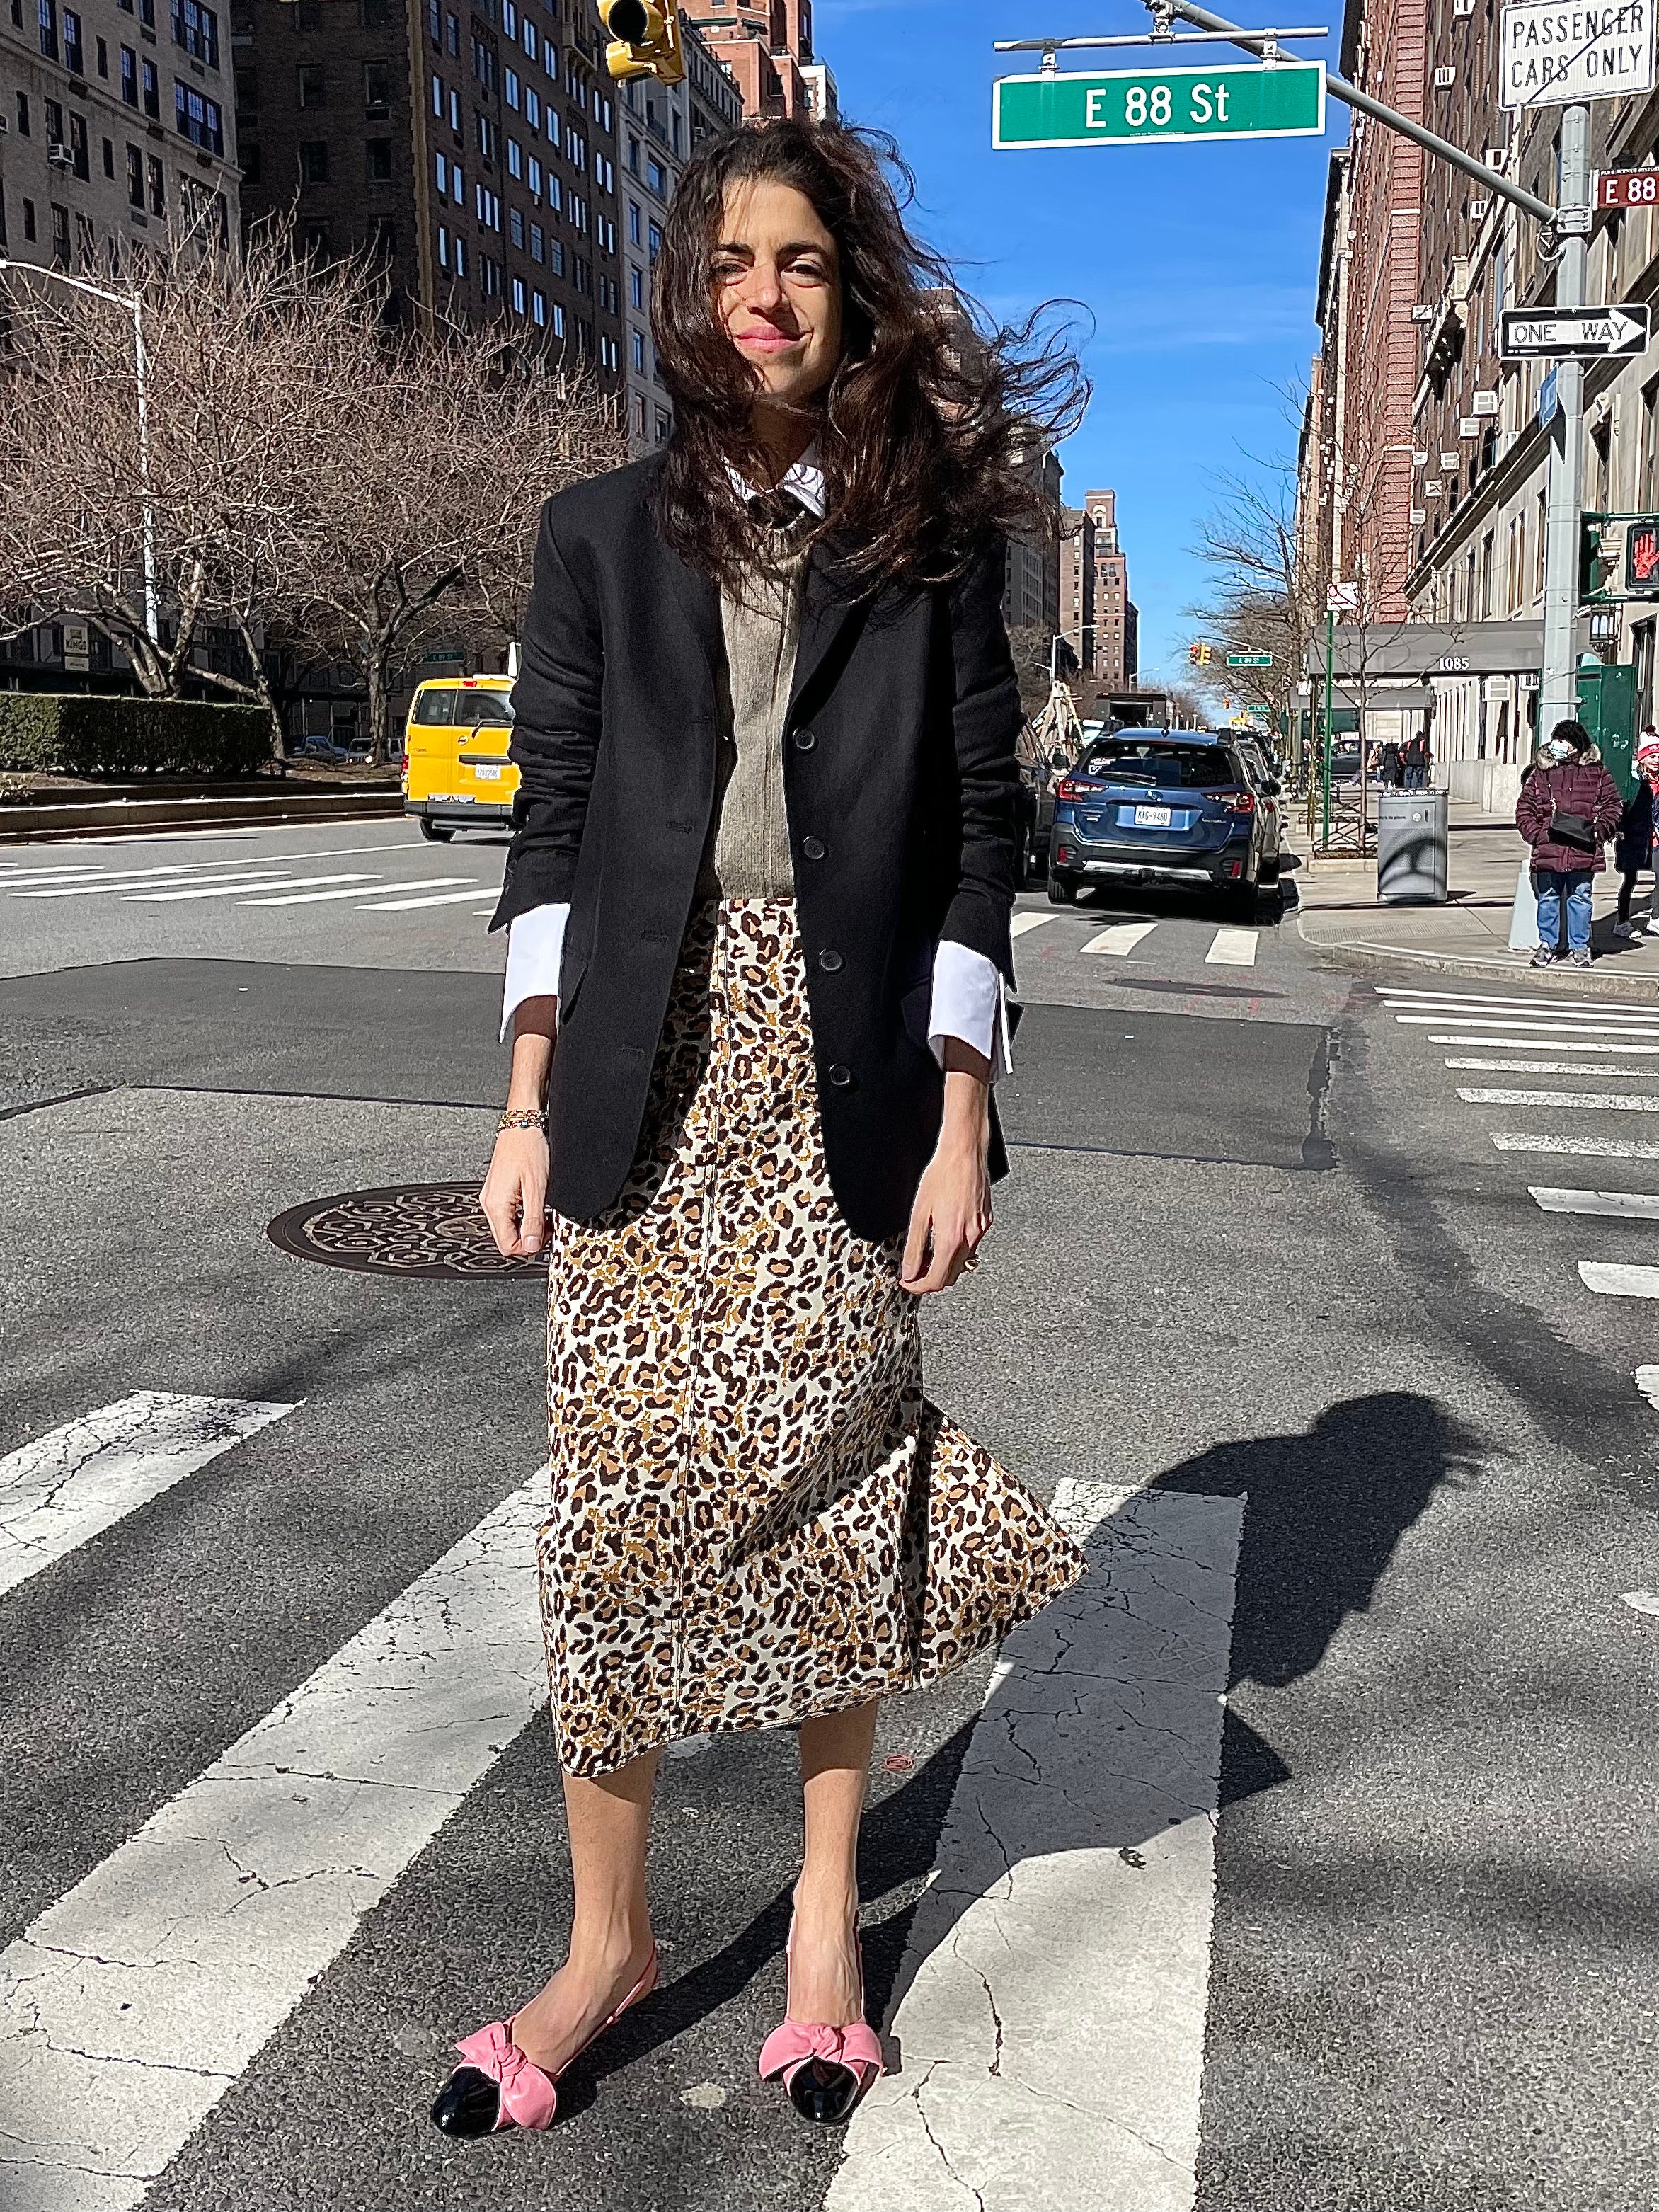 Is leopard print a trend? Here’s how to wear it